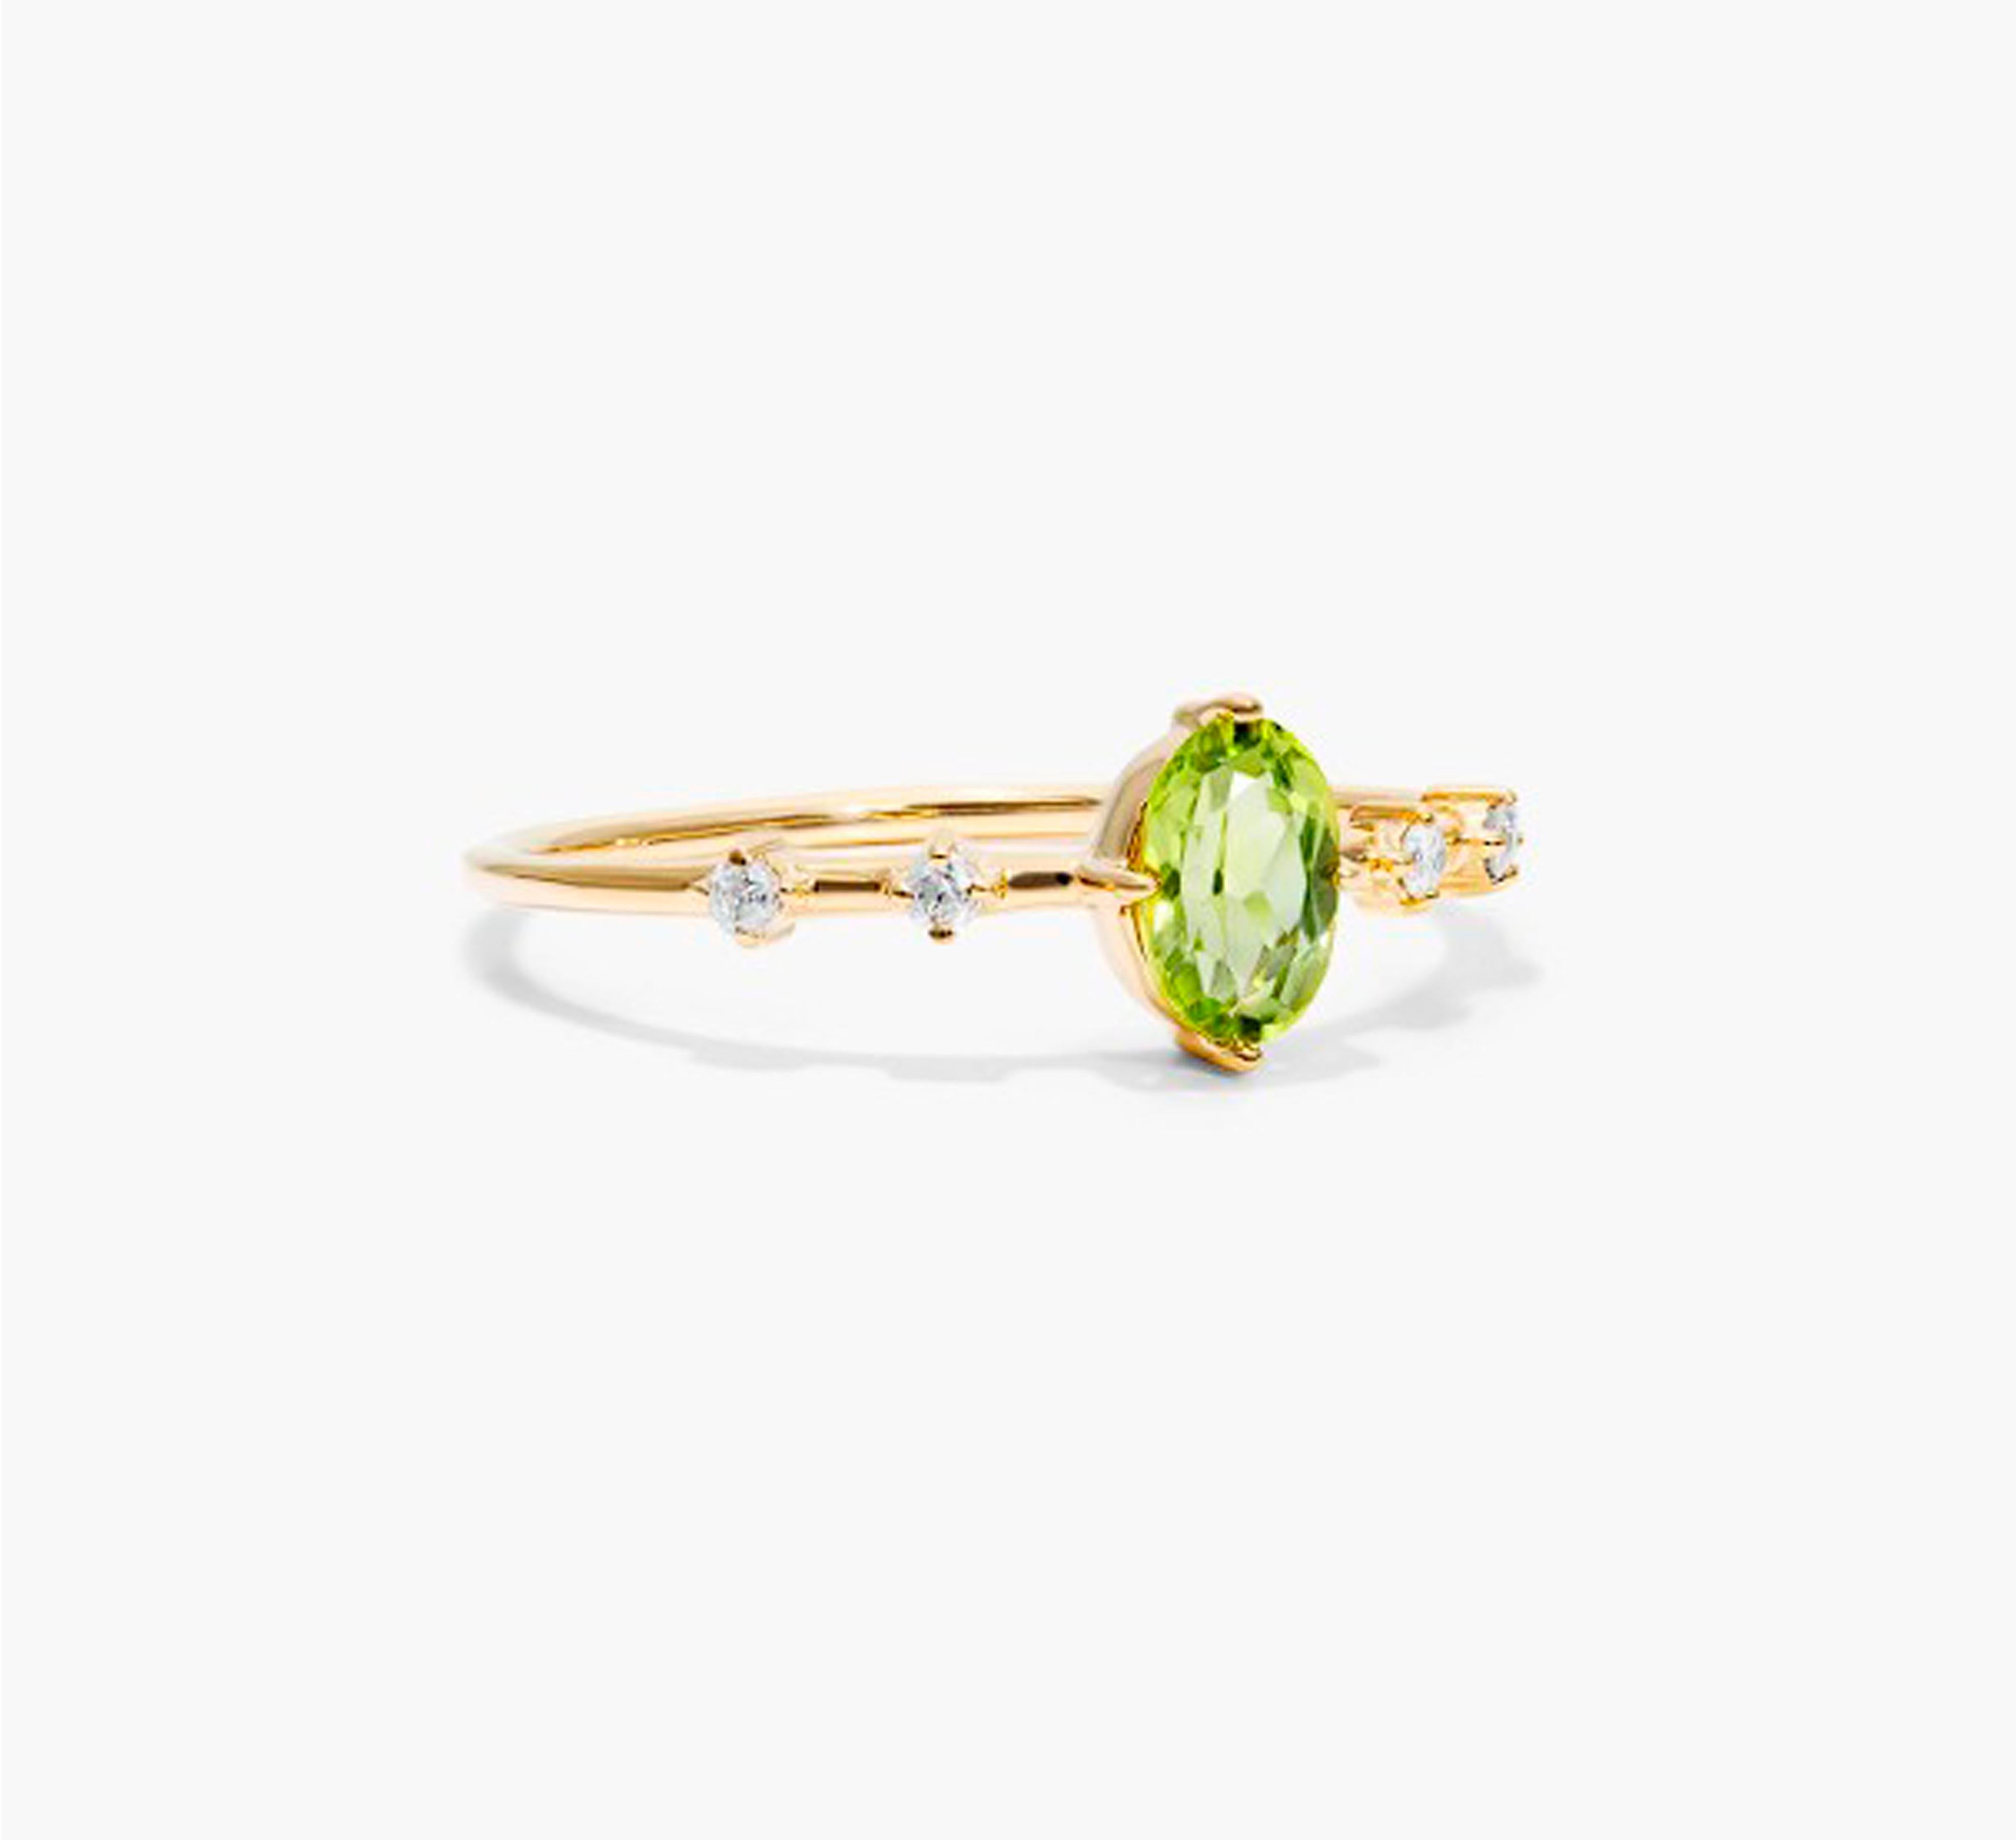 August birthstone peridot 14k gold ring. Genuine peridot 14k gold ring. Peridot engagement ring. Peridot vintage ring. Oval peridot ring. Natural peridot ring.  

Metal: 14k solid gold
Weight: 1.8 gr (depends from size)
Central gemstone:
Natural